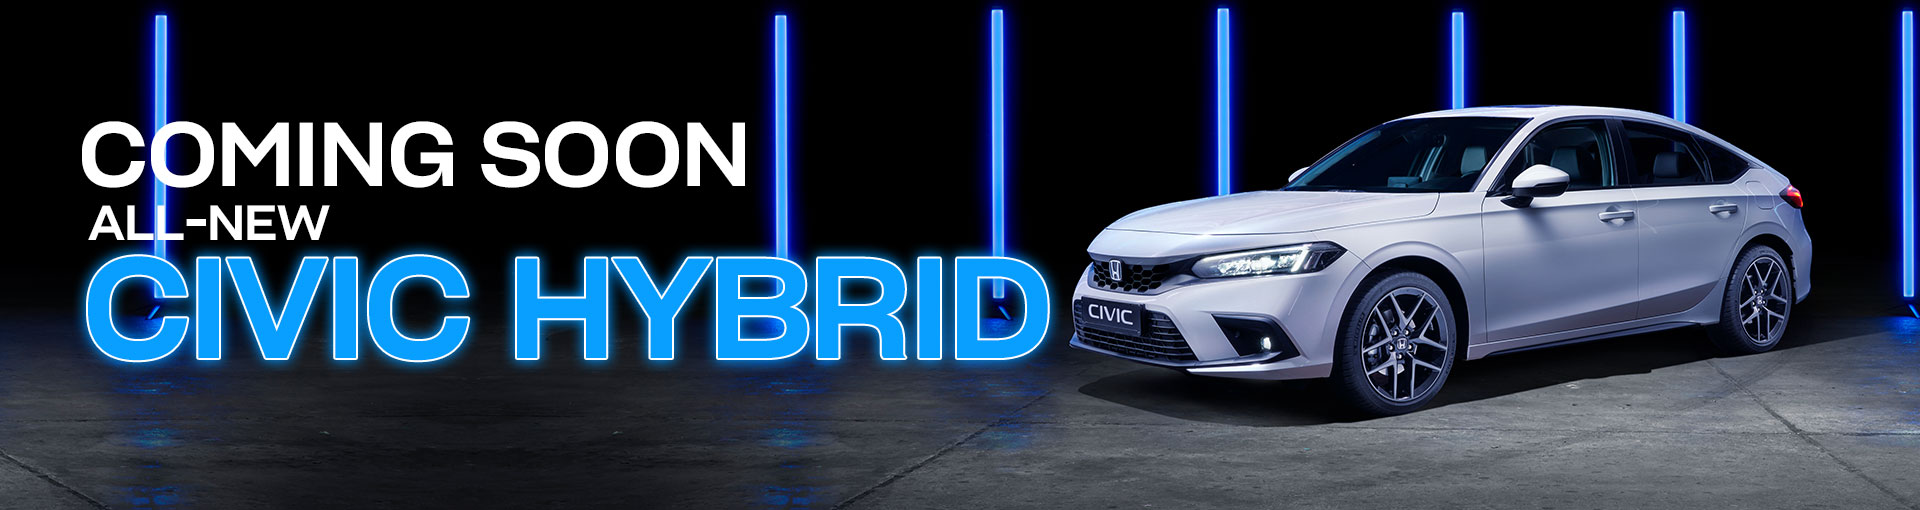 Coming Soon – All-New Civic Hybrid	